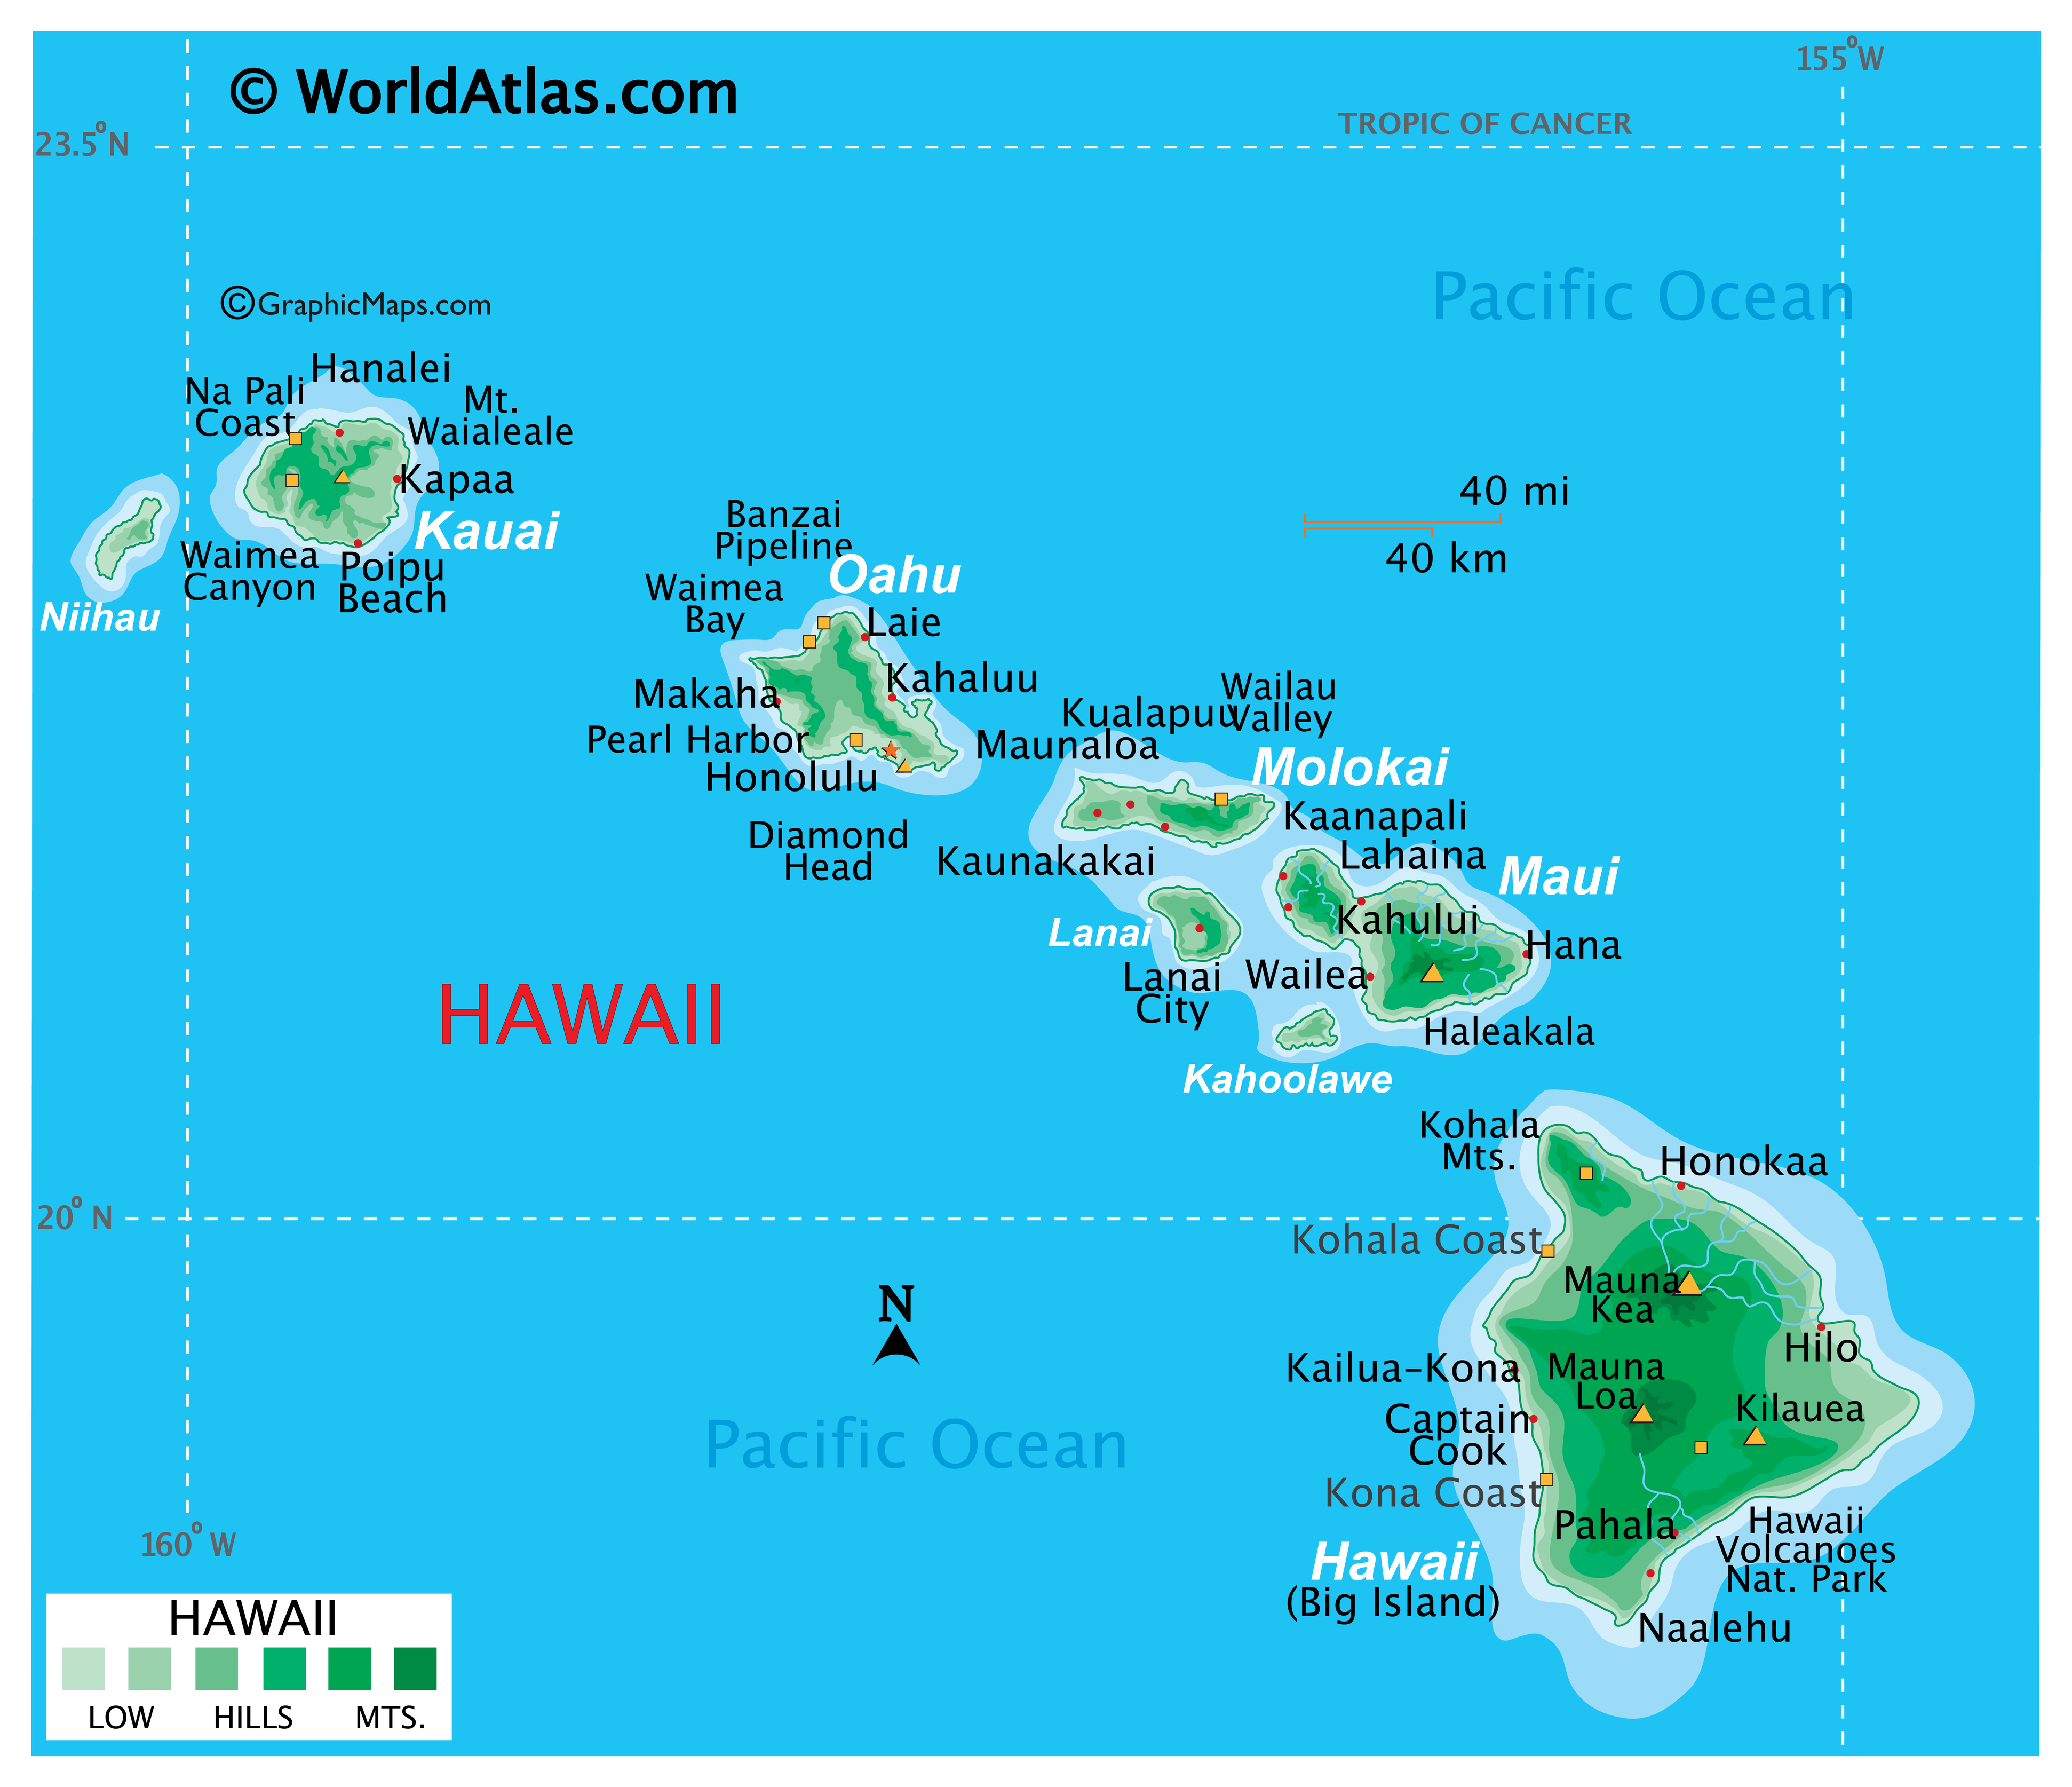 IV. Climate and Weather Patterns of Hawaii Islands